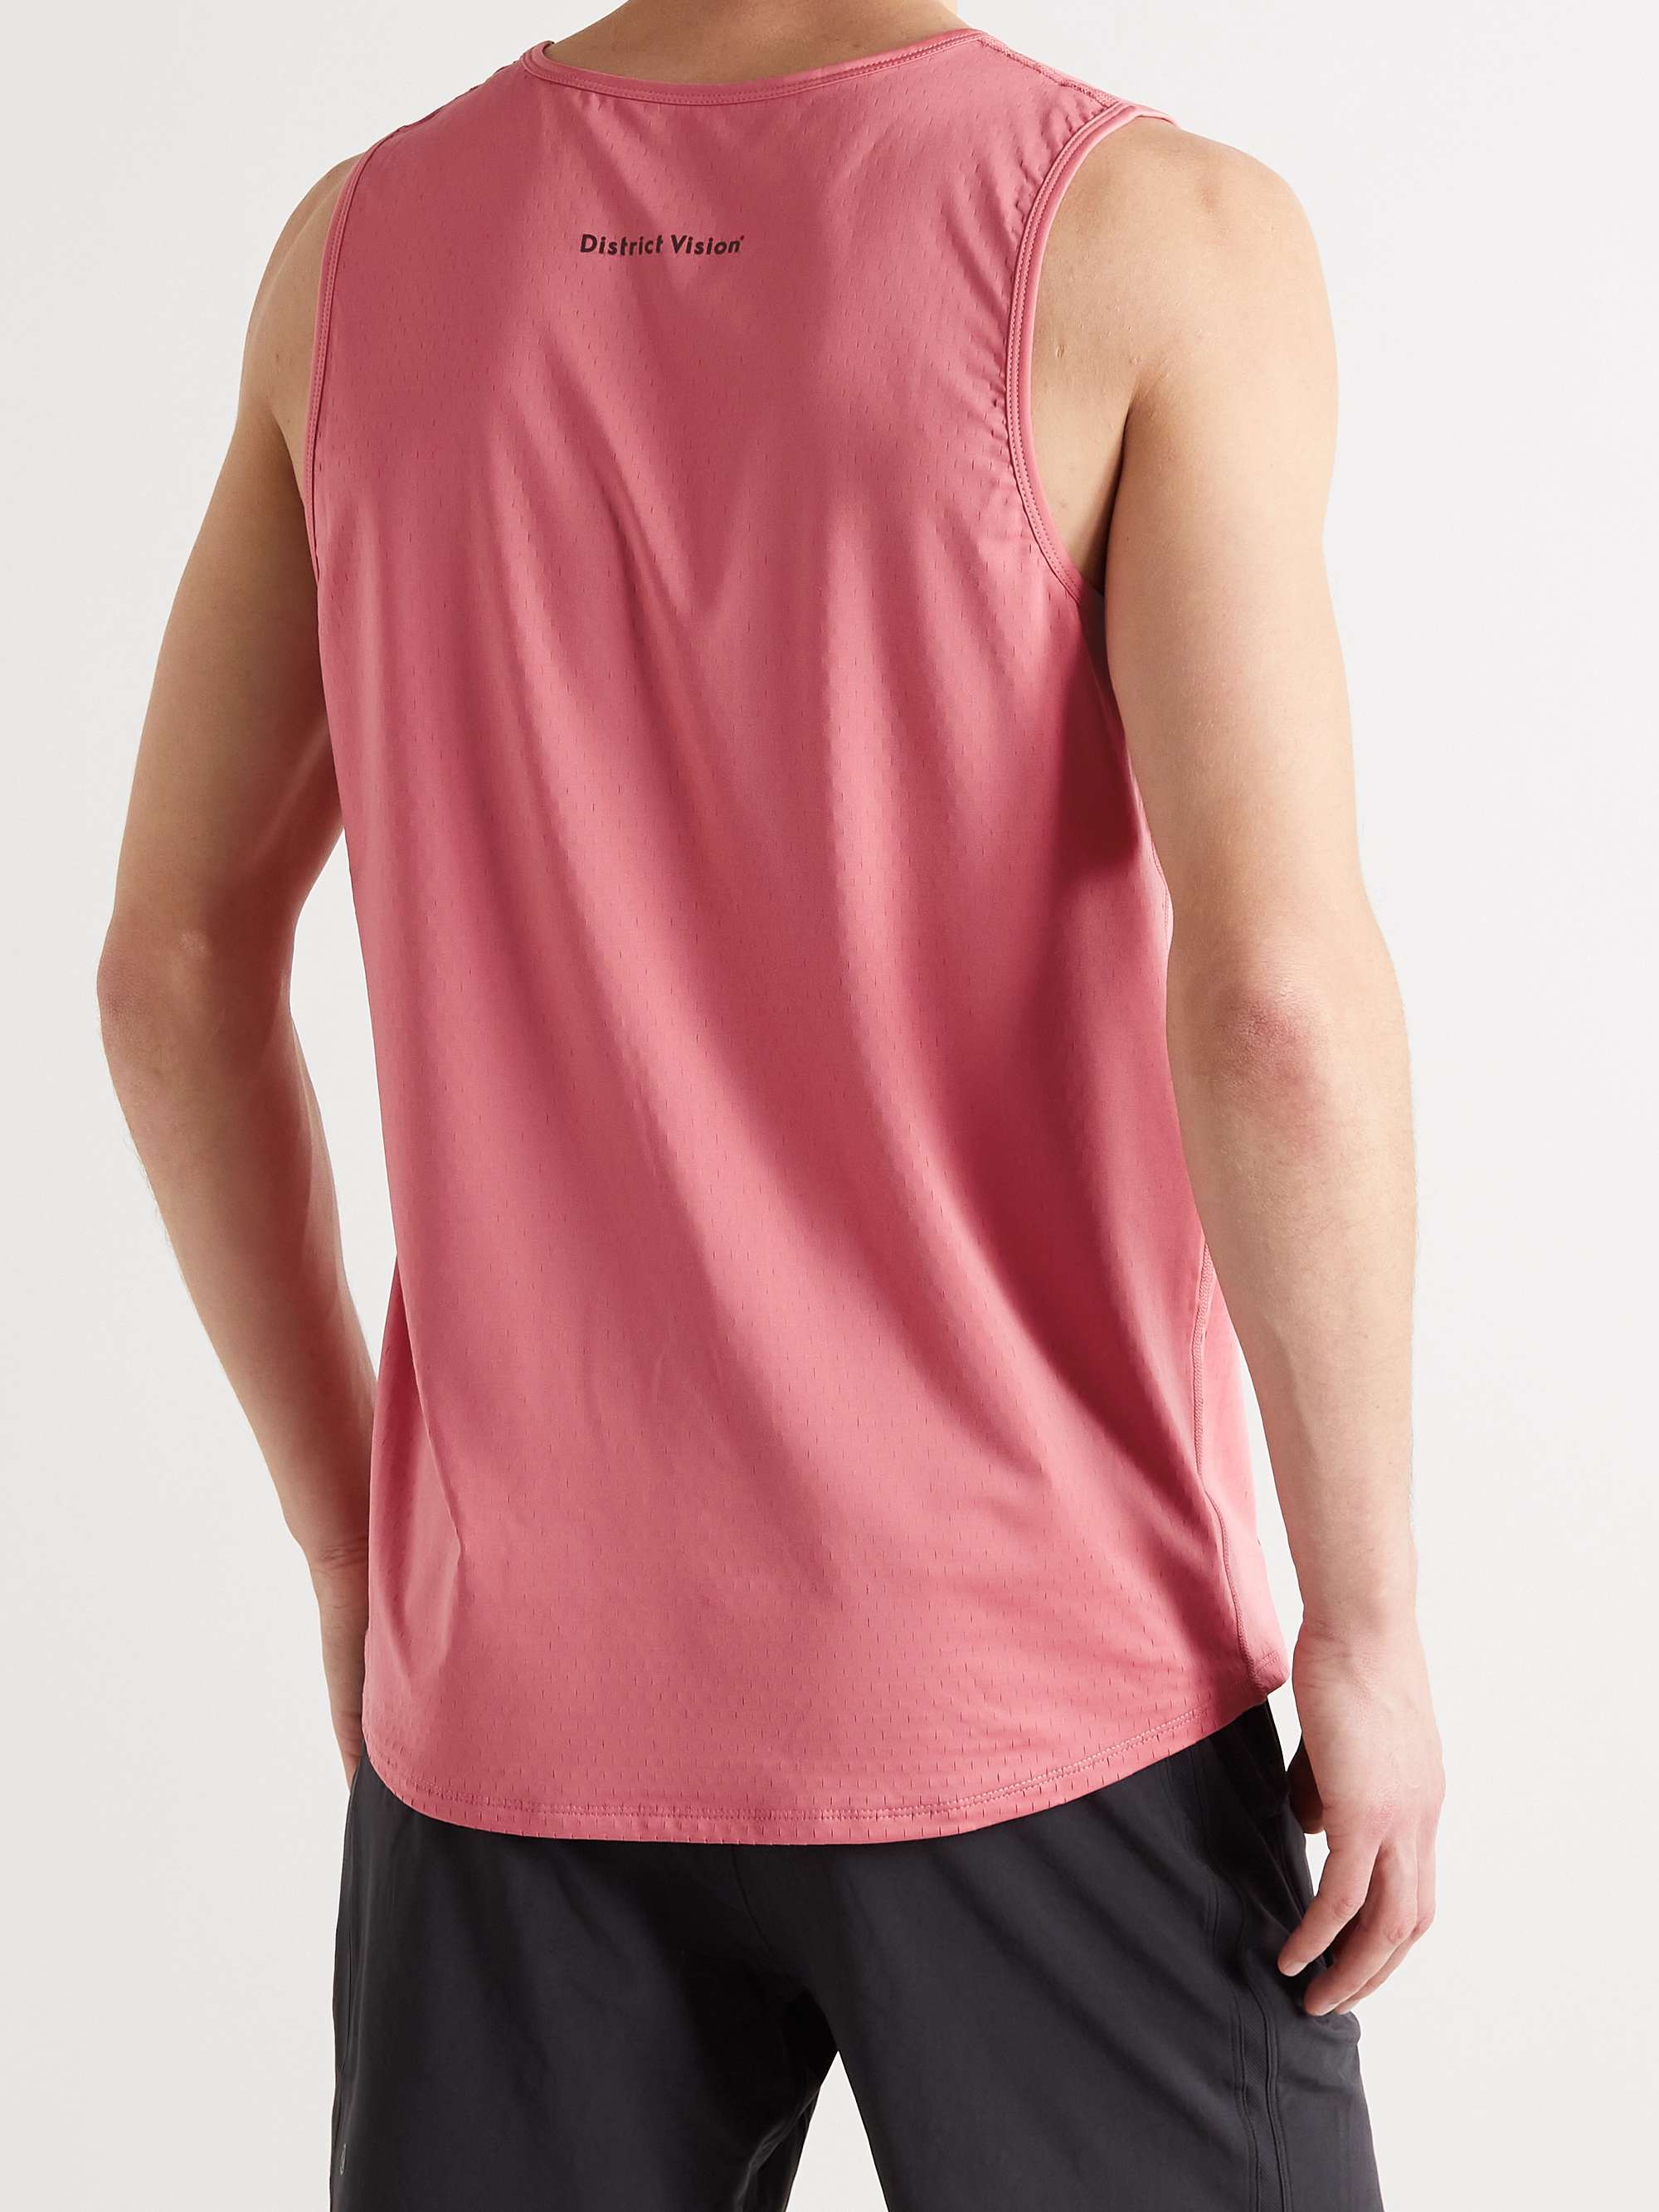 DISTRICT VISION Air-Wear Stretch-Jersey Tank Top